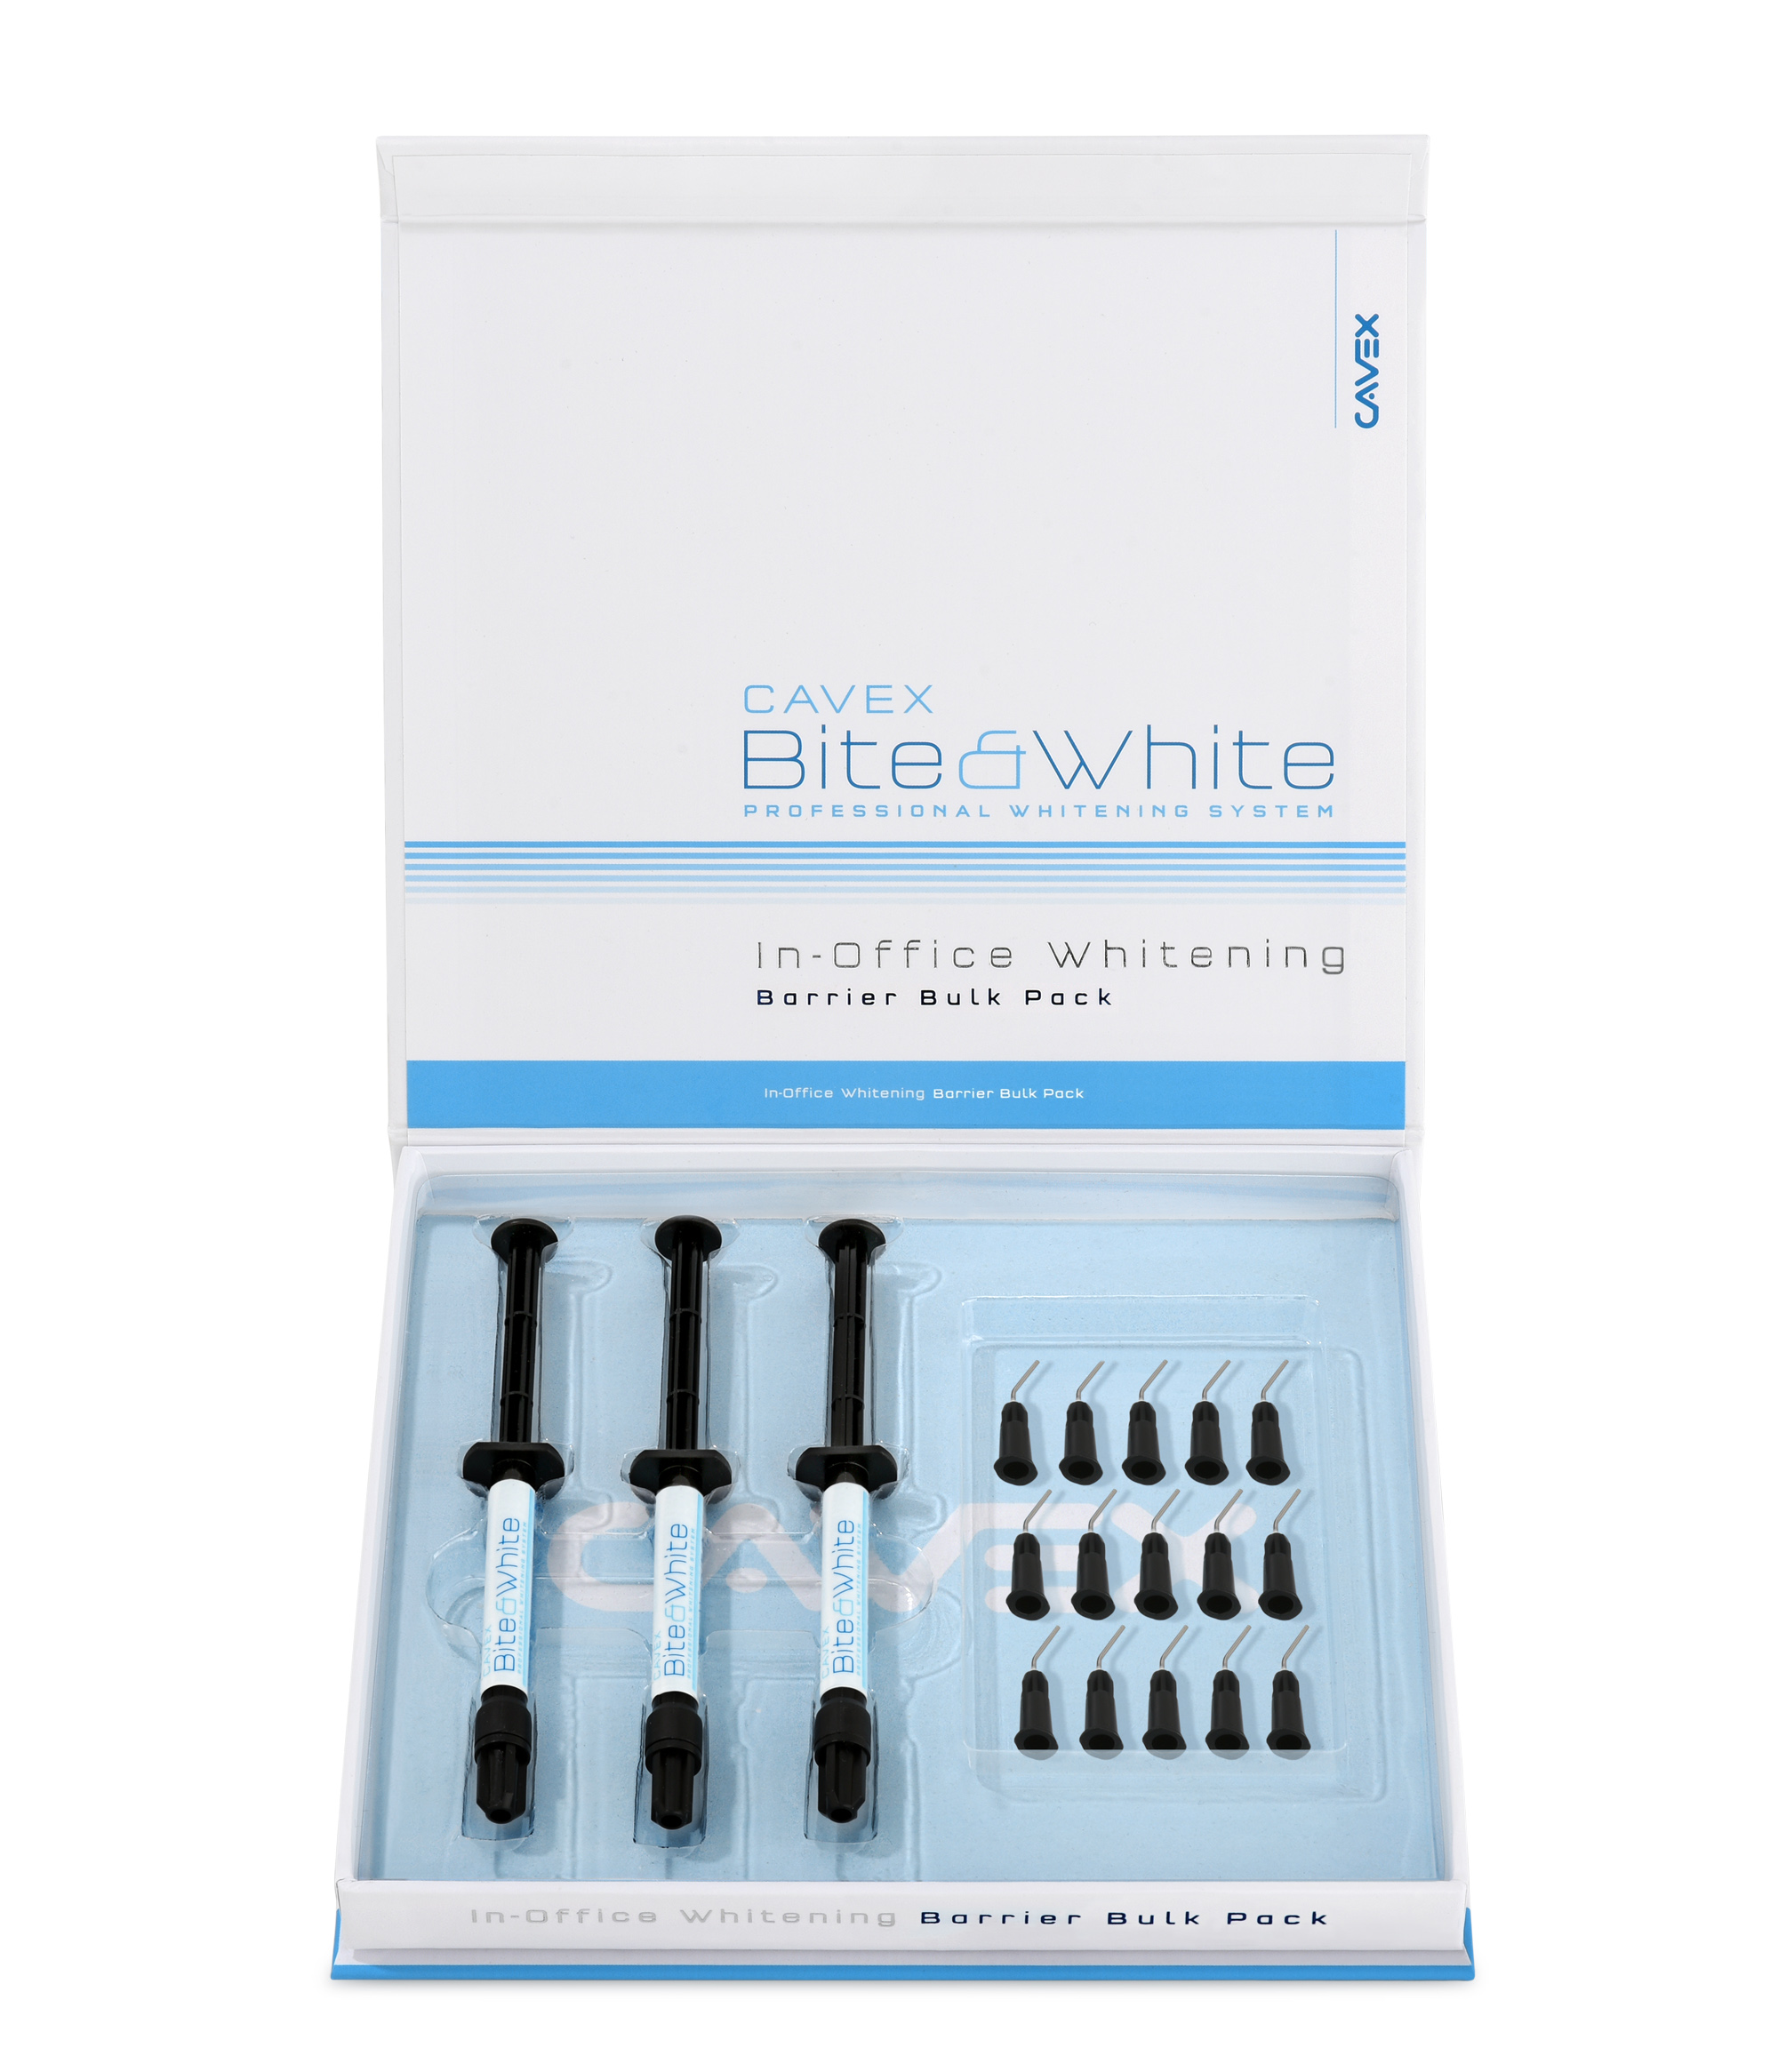 Teeth Whitening Test Products, Supplies and Equipment